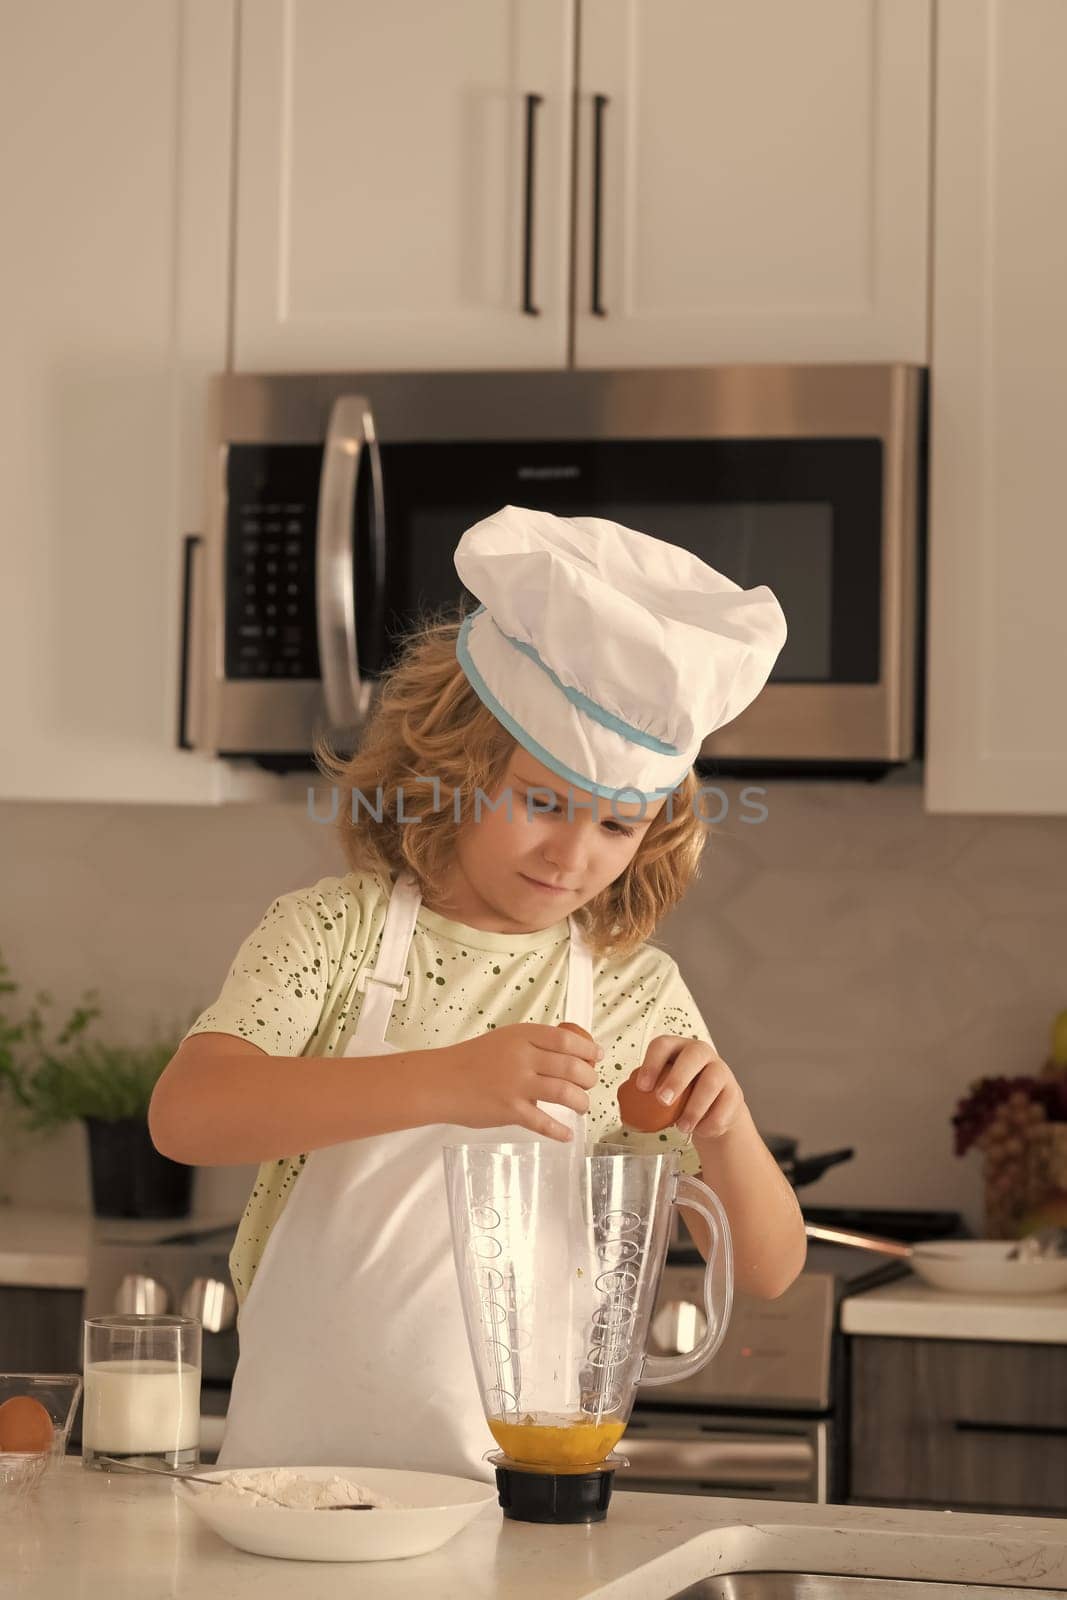 Chef kid cook baking at home kitchen. Kid chef cook cookery at kitchen. Cooking, culinary and kids. Little boy in chefs hat and apron. by RedFoxStudio